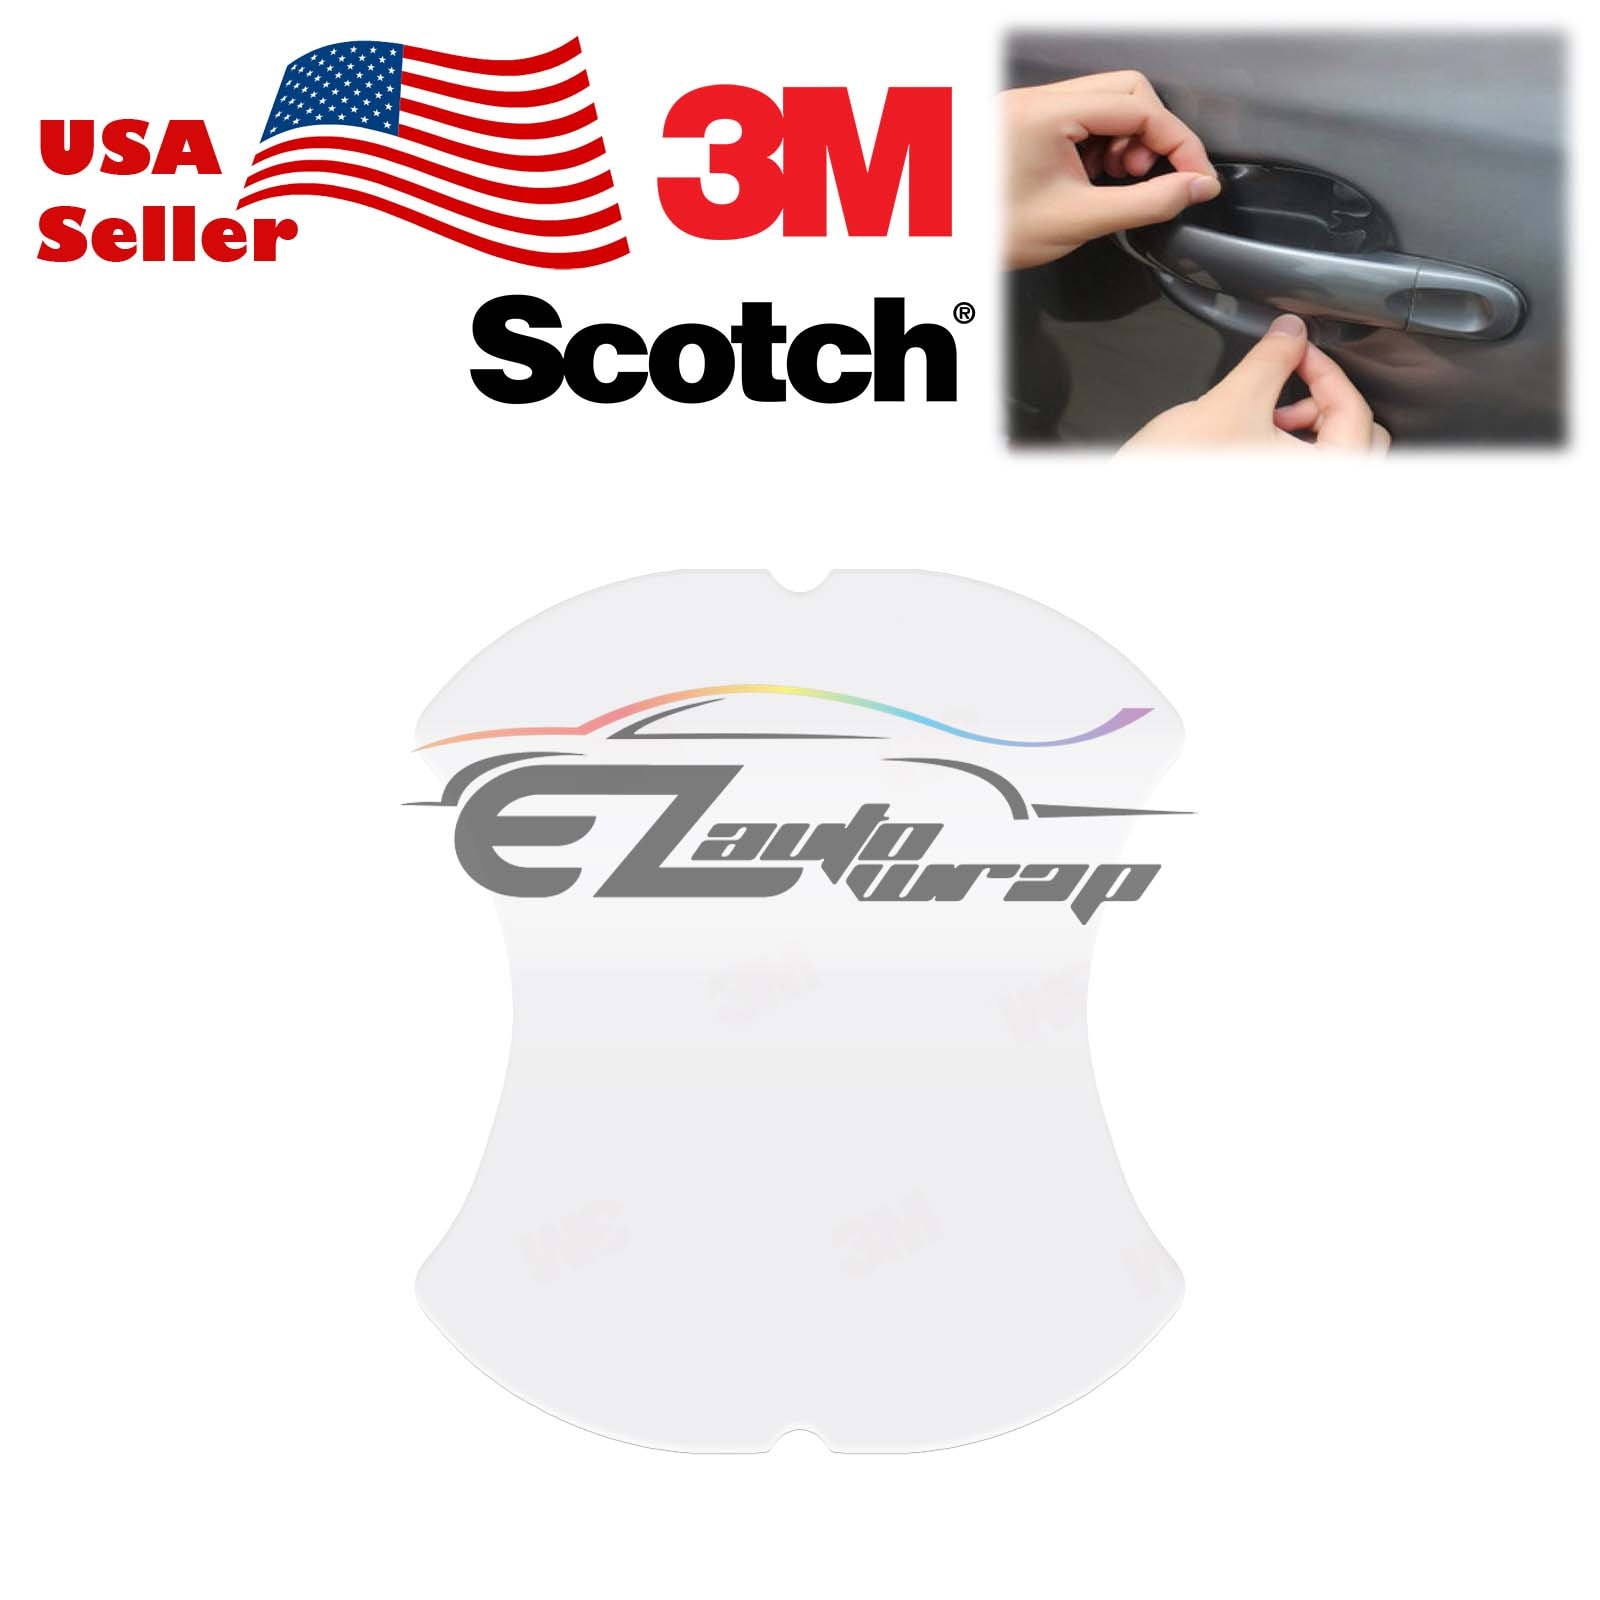 Door Edge Guard ScotchGard Scratch 3M Protection Film Clear Invisible –  UproMax